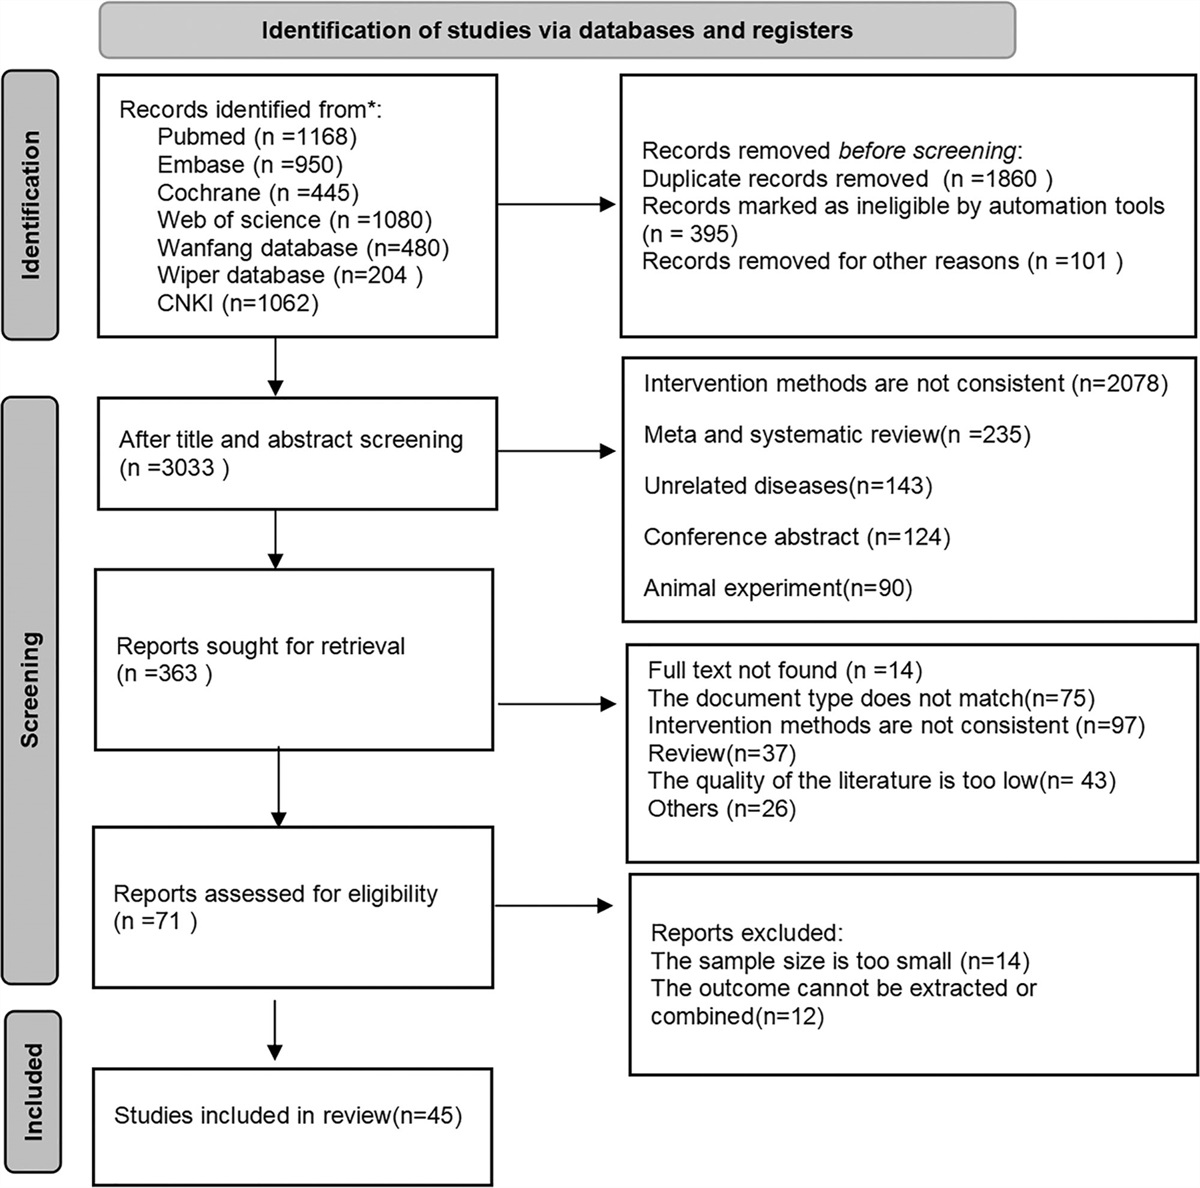 Preventive effects of chemical drugs on recurrence of colorectal adenomas: systematic review and Bayesian network meta-analysis